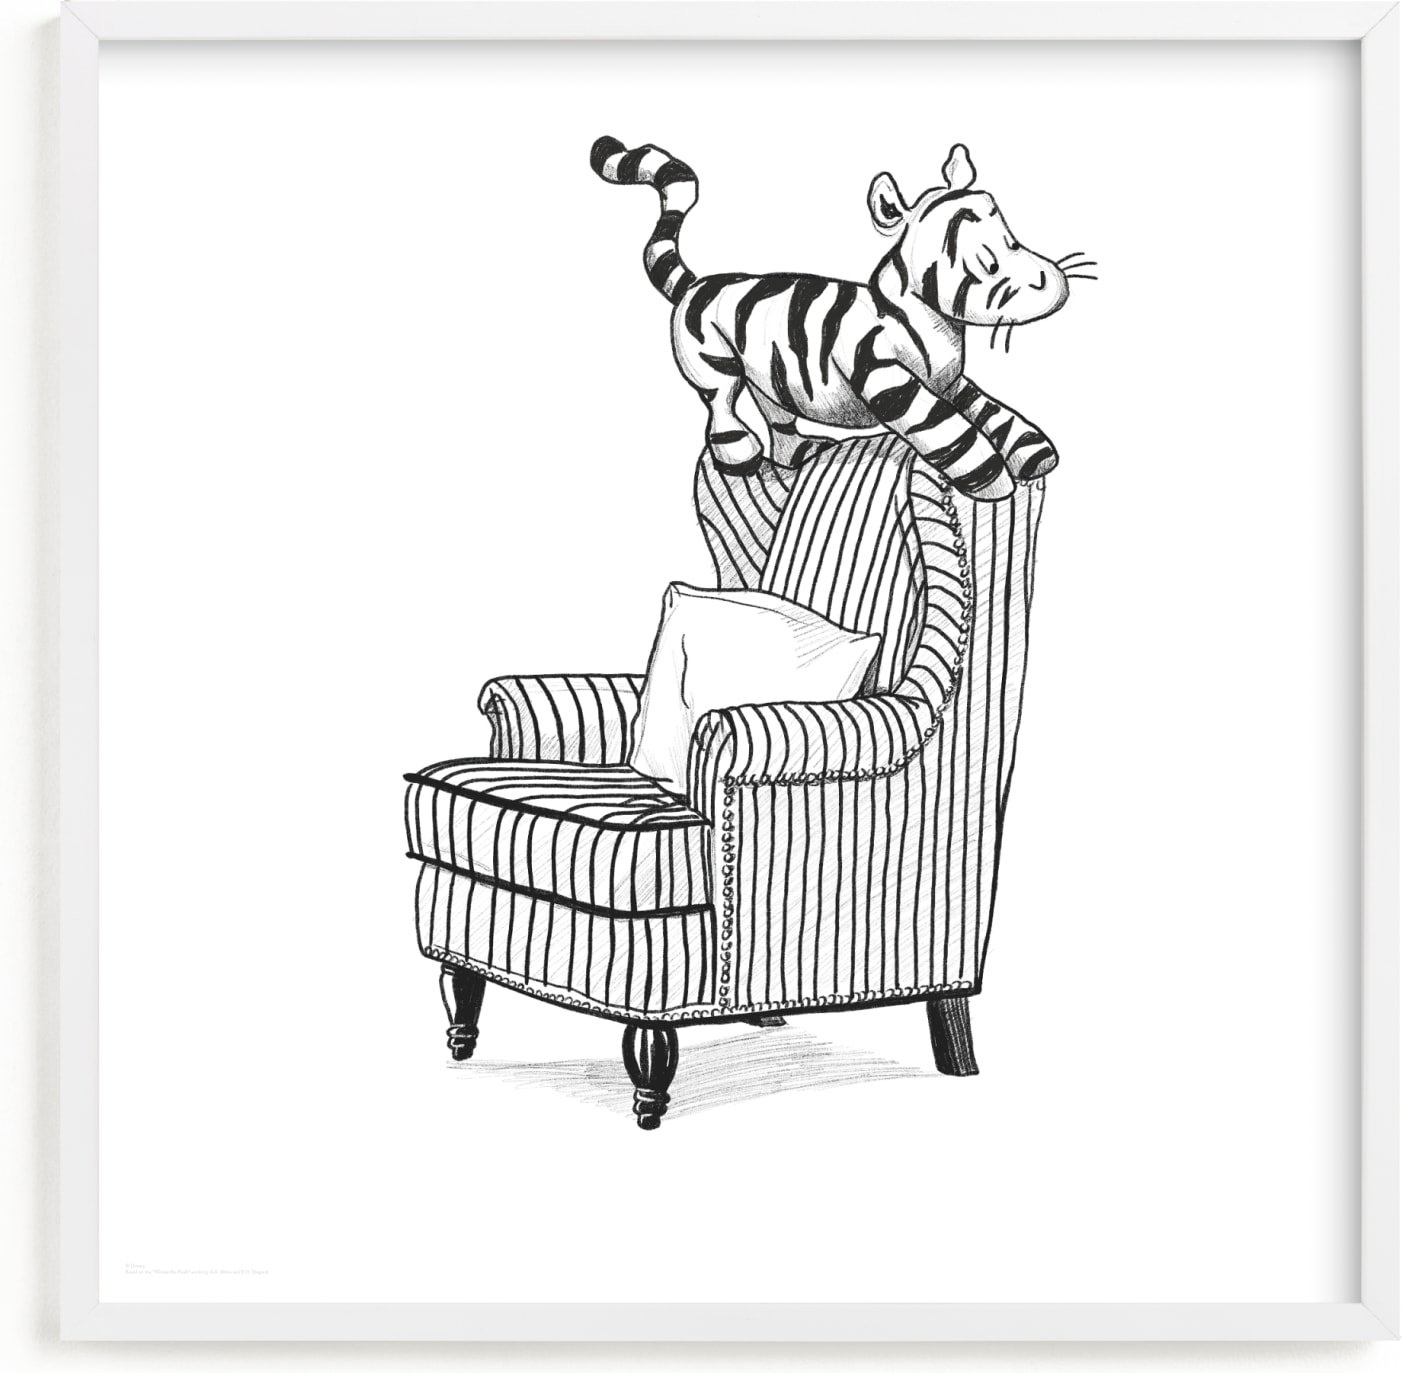 This is a black and white disney art by Stefanie Lane called Tigger Lounging from Disney's Winnie The Pooh.